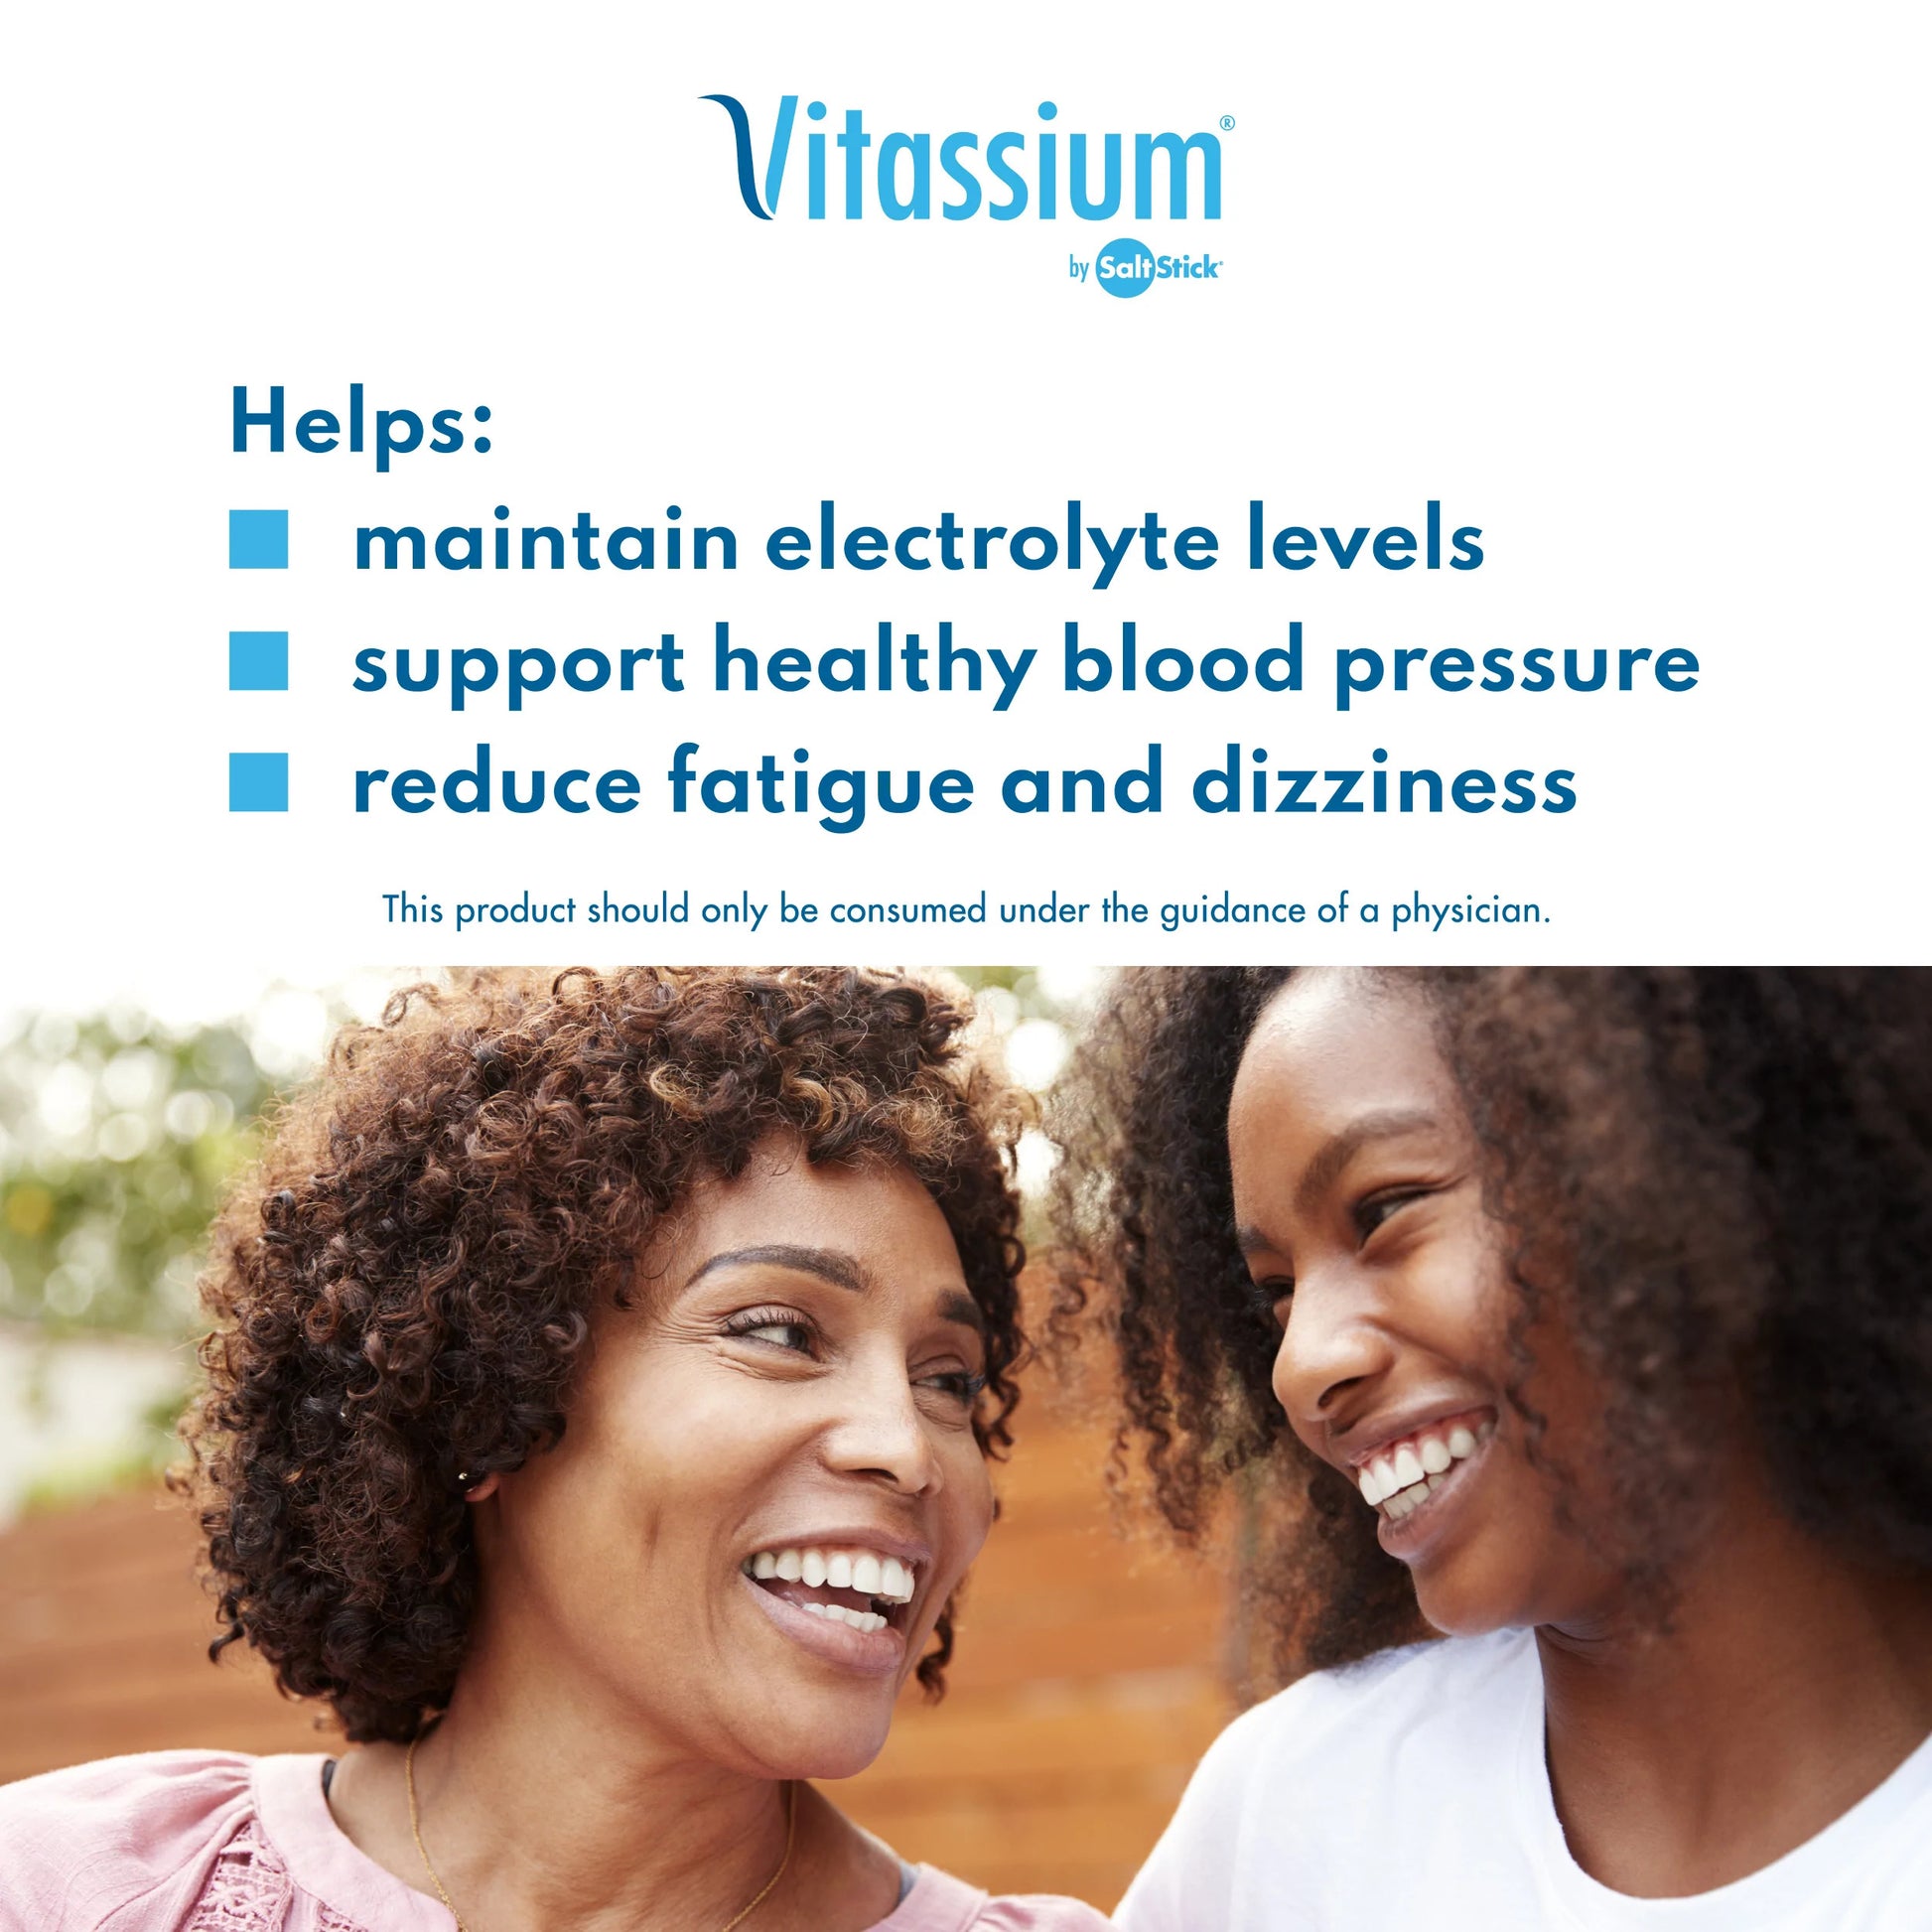 Vitassium Helps maintain electrolyte levels, support healthy blood pressure, and reduce fatigue and dizziness. This product should only be consumed under the guidance of a physician.